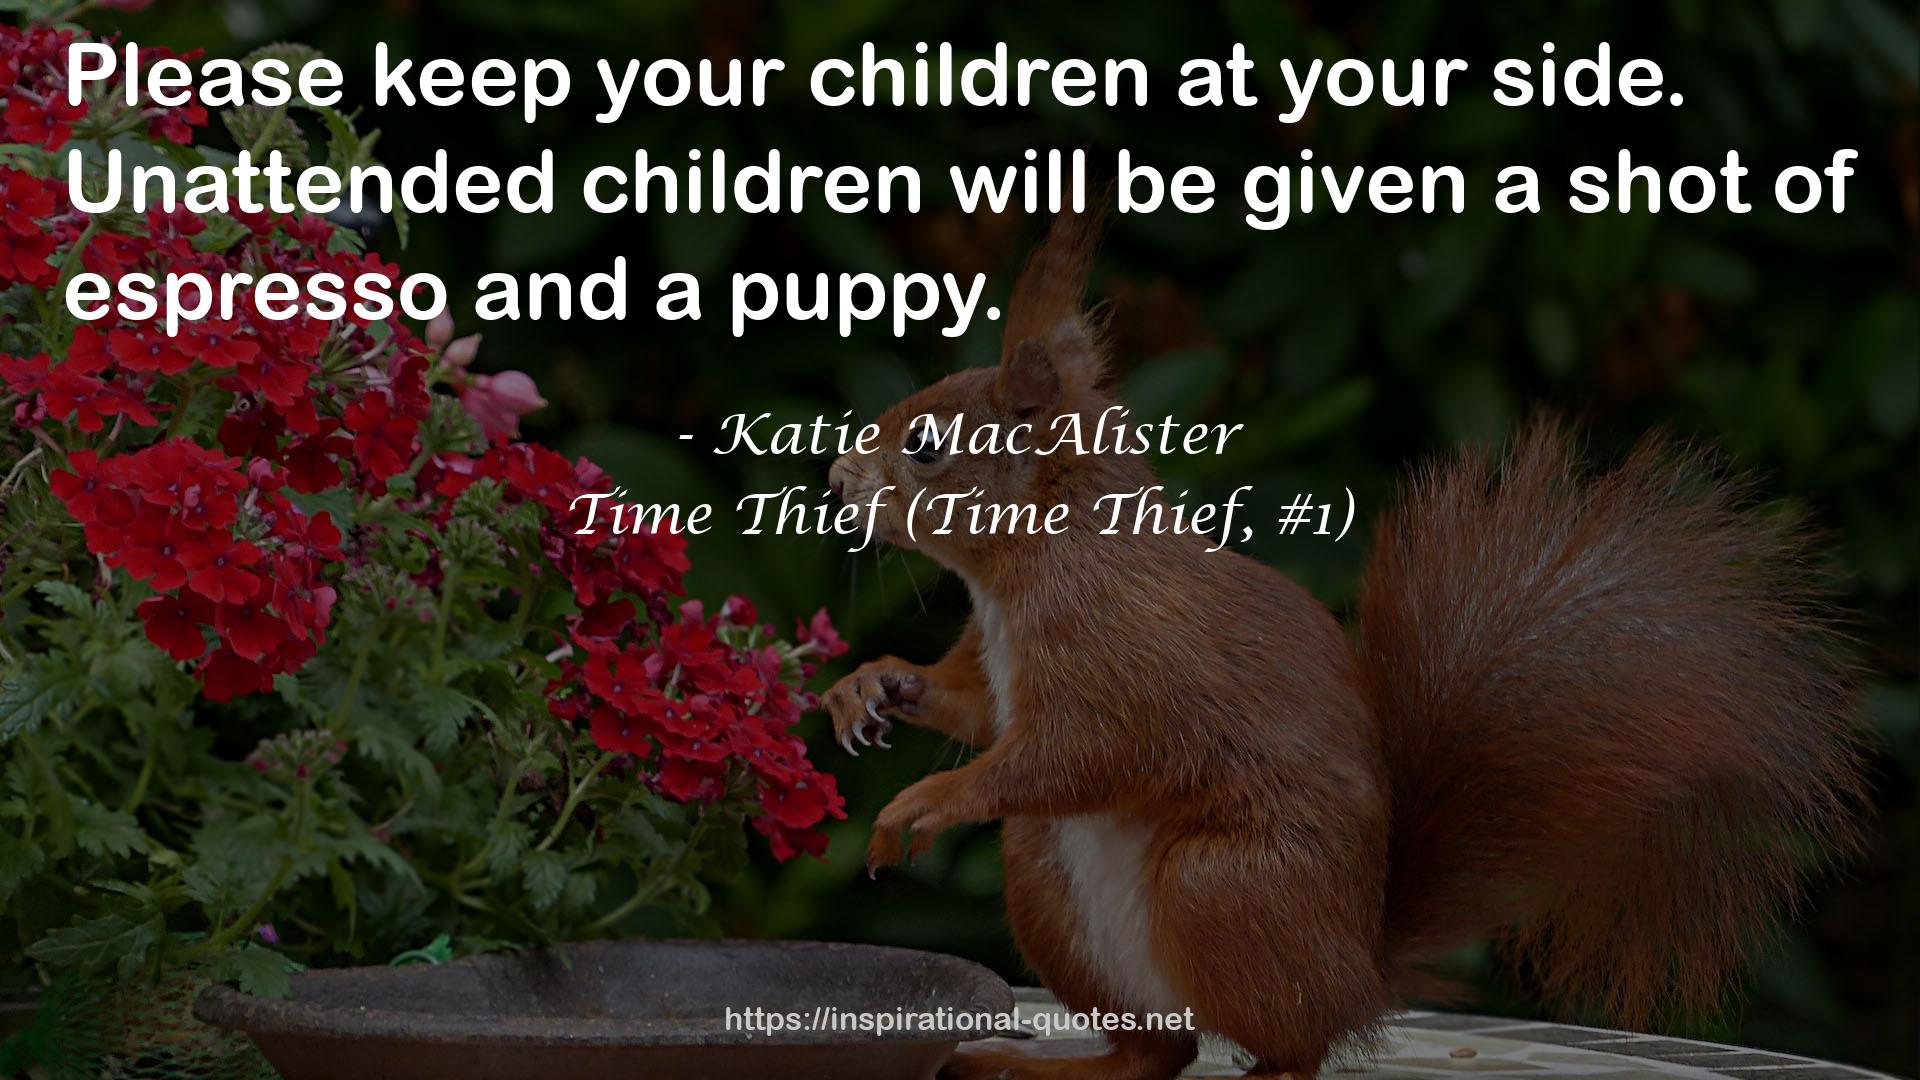 Time Thief (Time Thief, #1) QUOTES